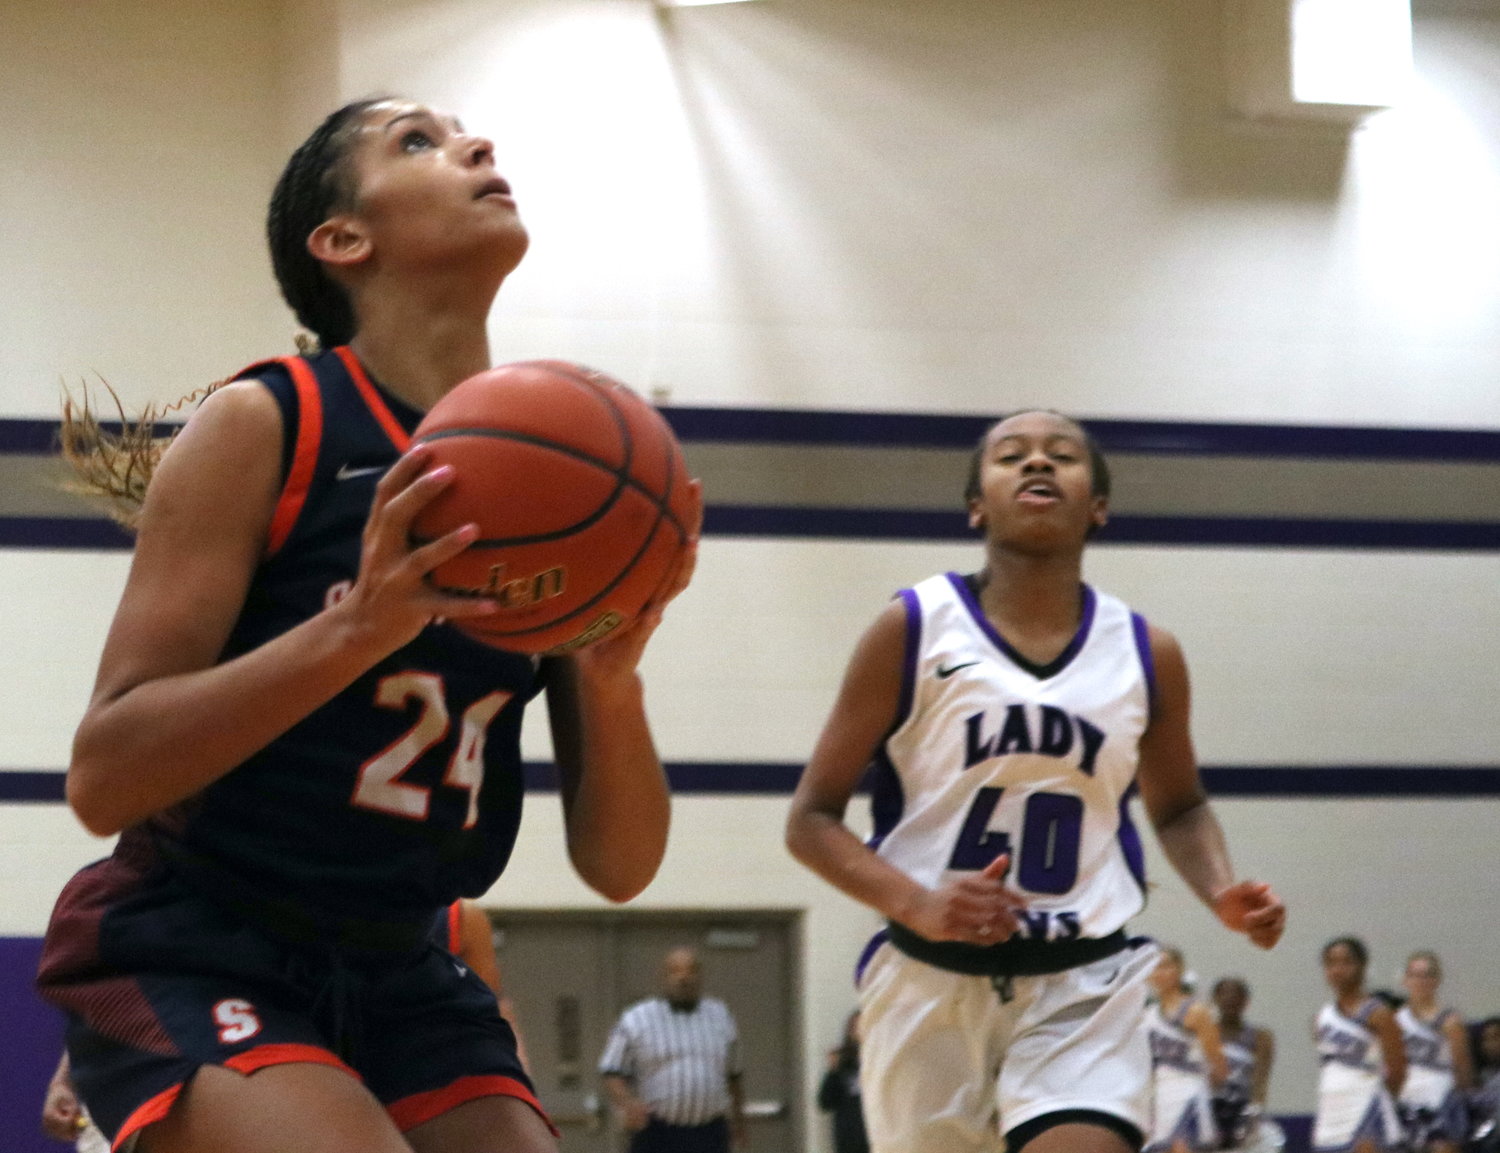 Madison Carlton goes up for a layup during Friday's game between Seven Lakes and Morton Ranch at the Morton Ranch gym.